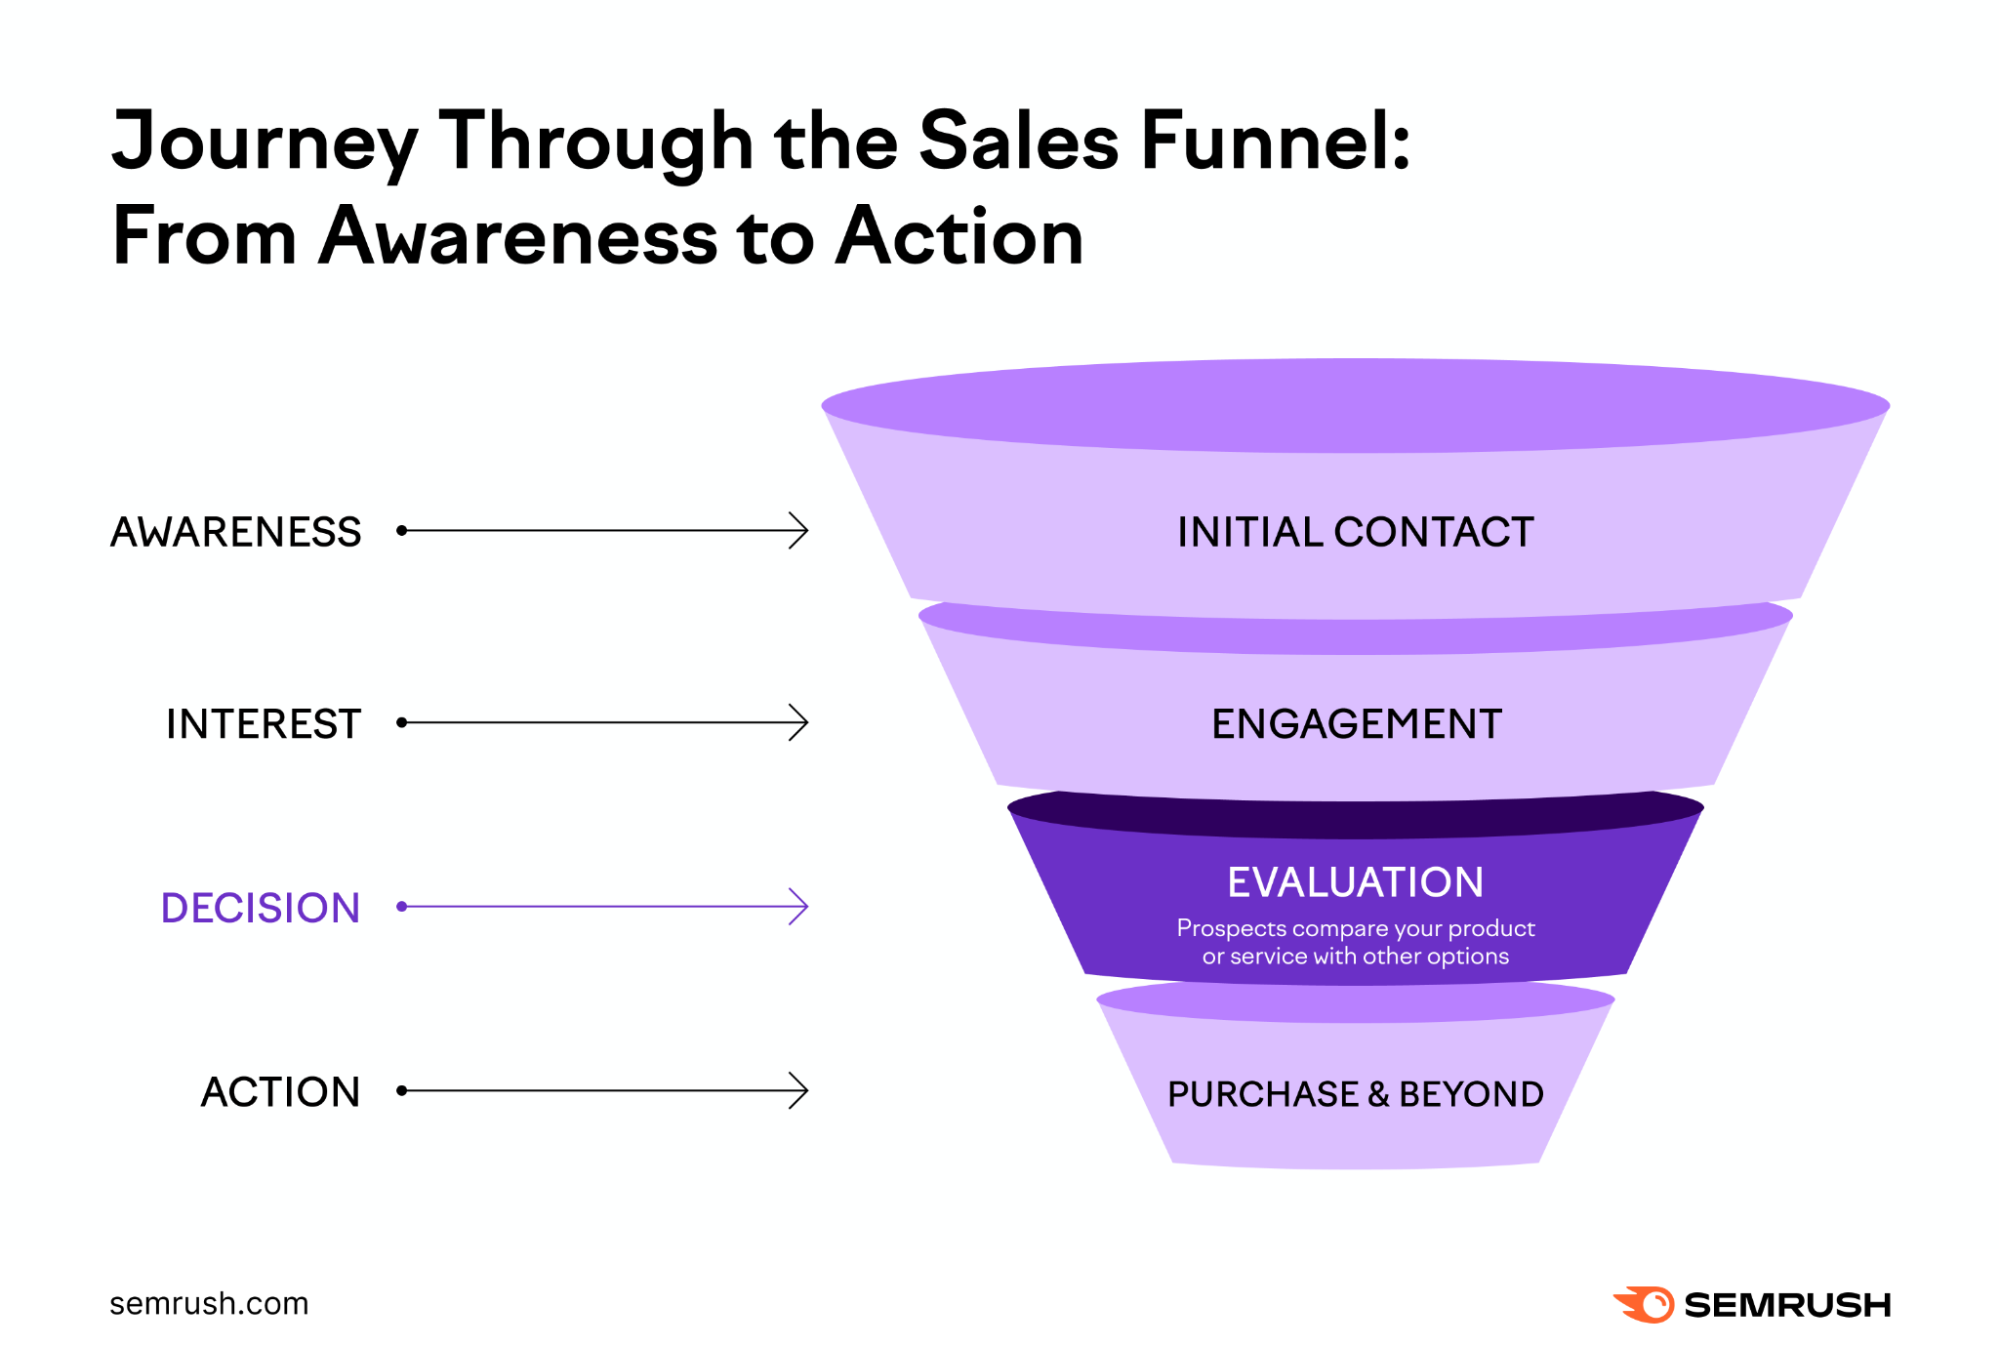 An infographic showing a sales funnel: from awareness to action, with "decision" highlighted